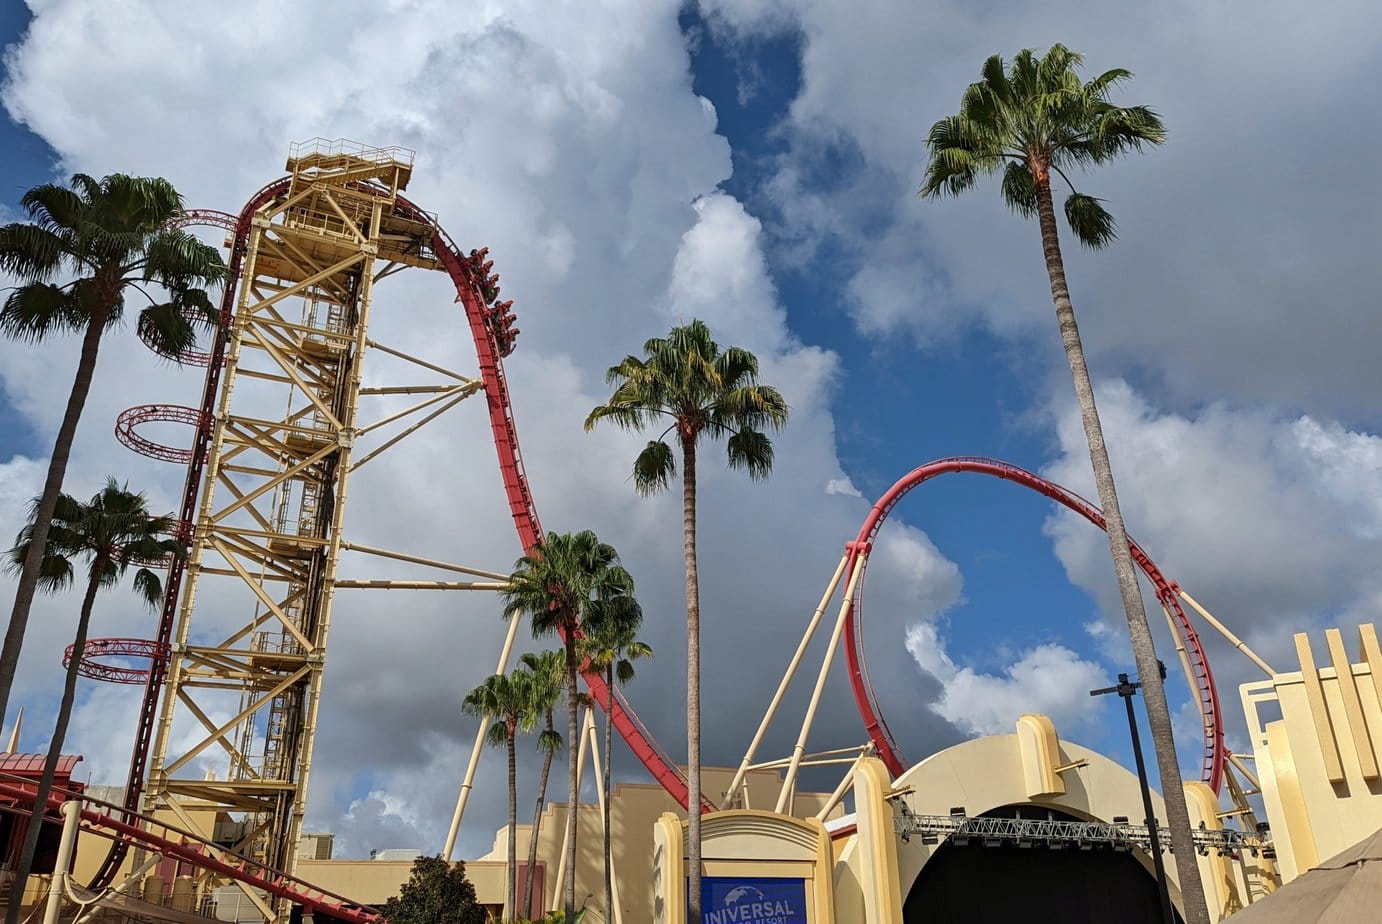 Universal Orlando Tickets, Packages, & Prices